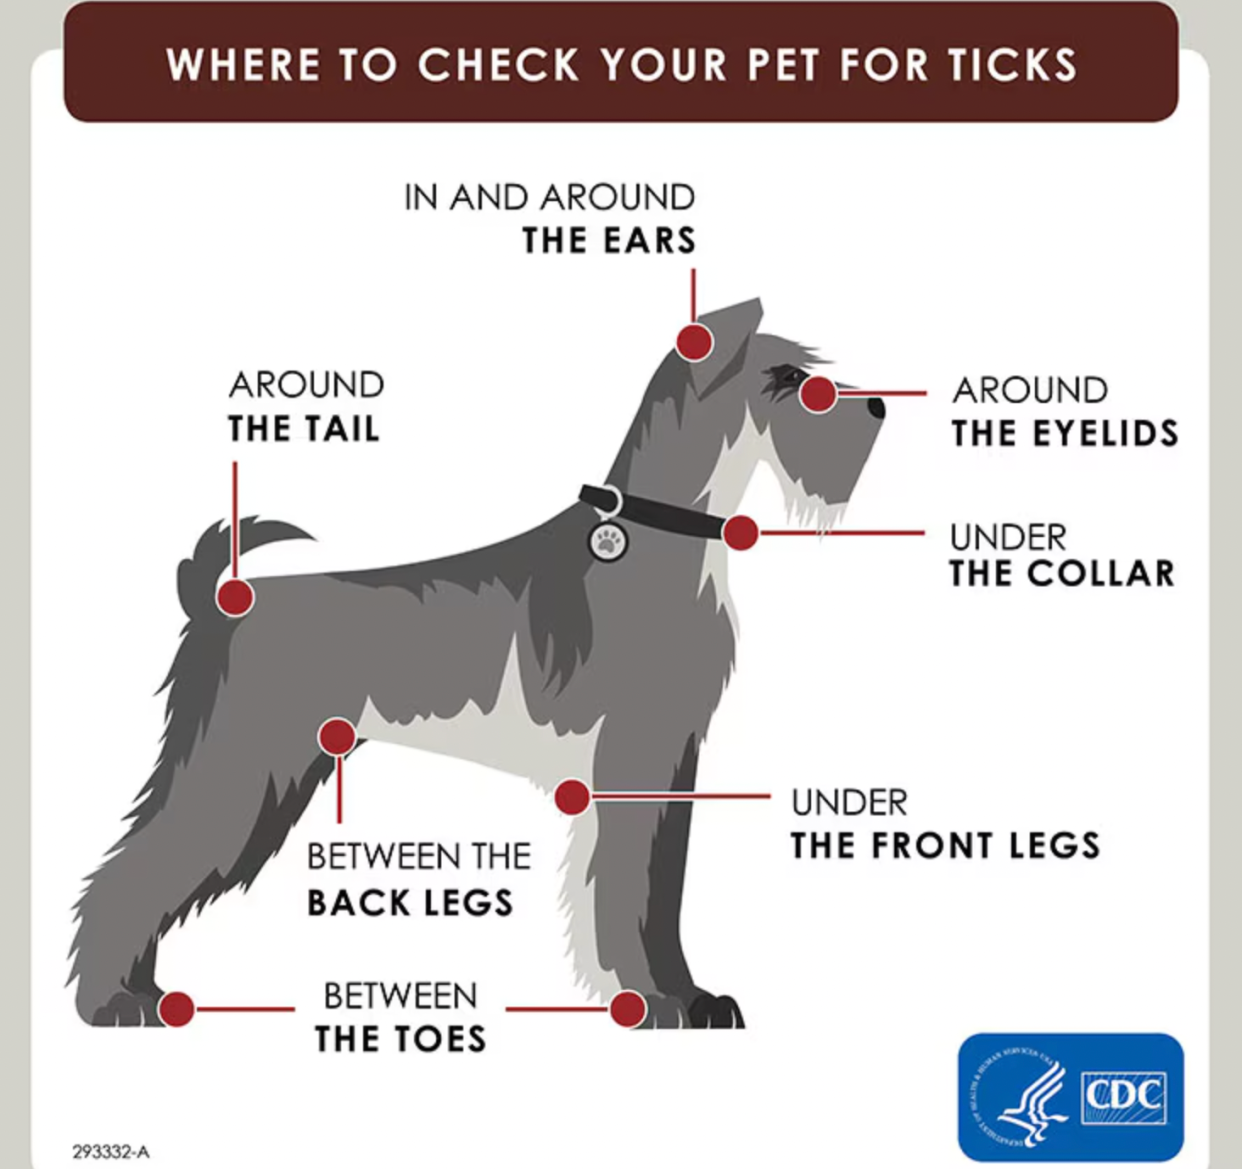 Where to check on your dog for ticks, from the the U.S. Center for Disease Control.